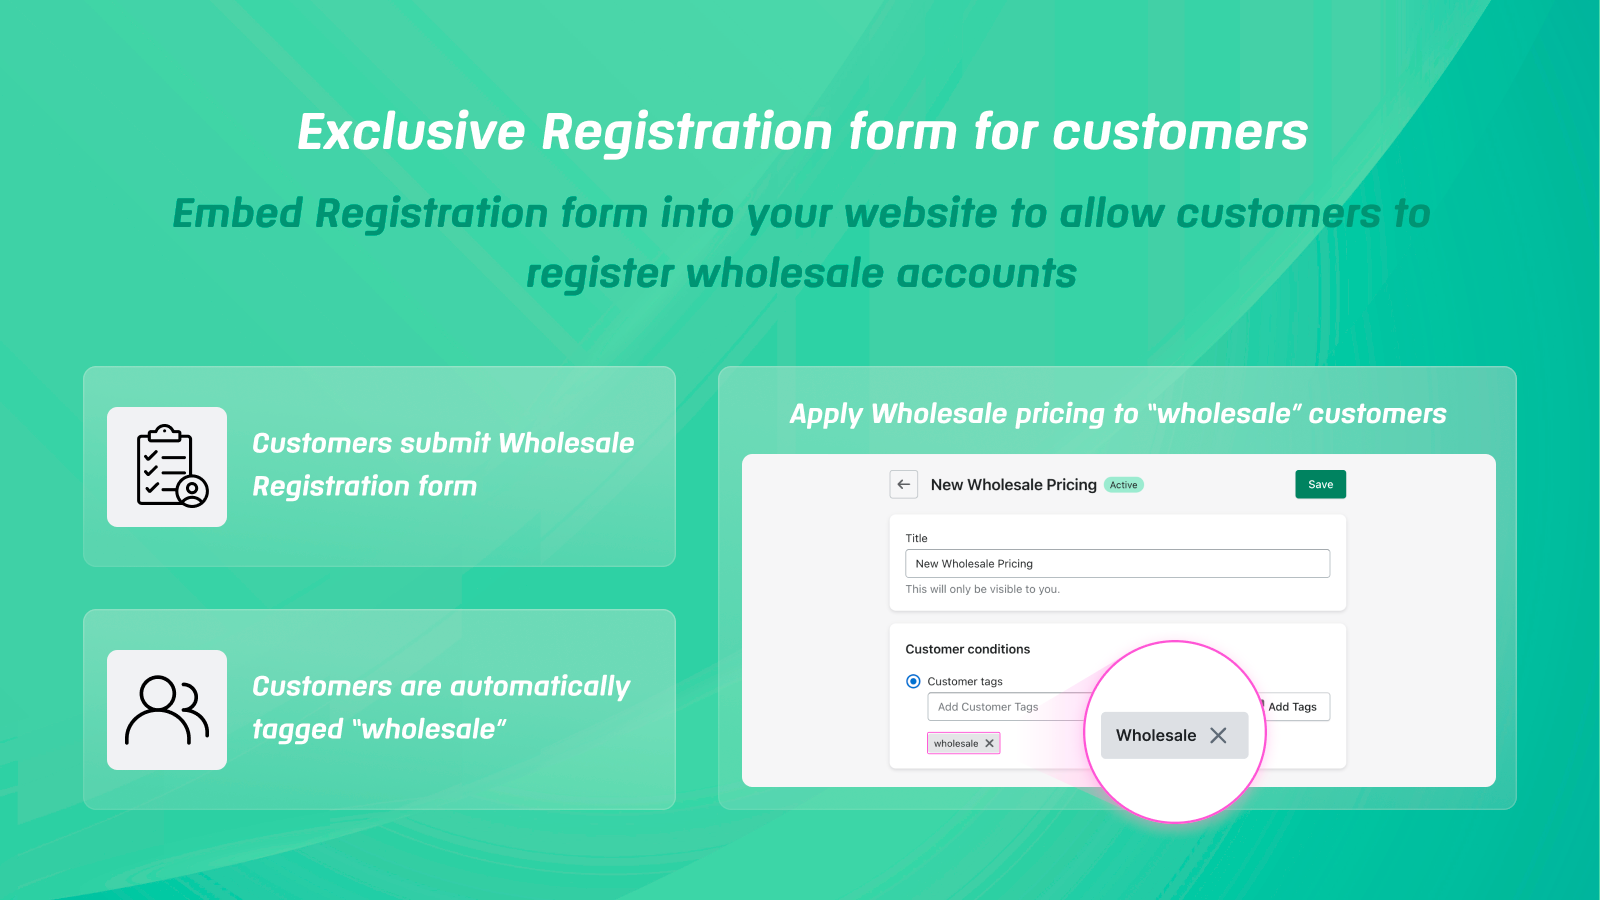 Exclusive sign-up form for wholesale customers 